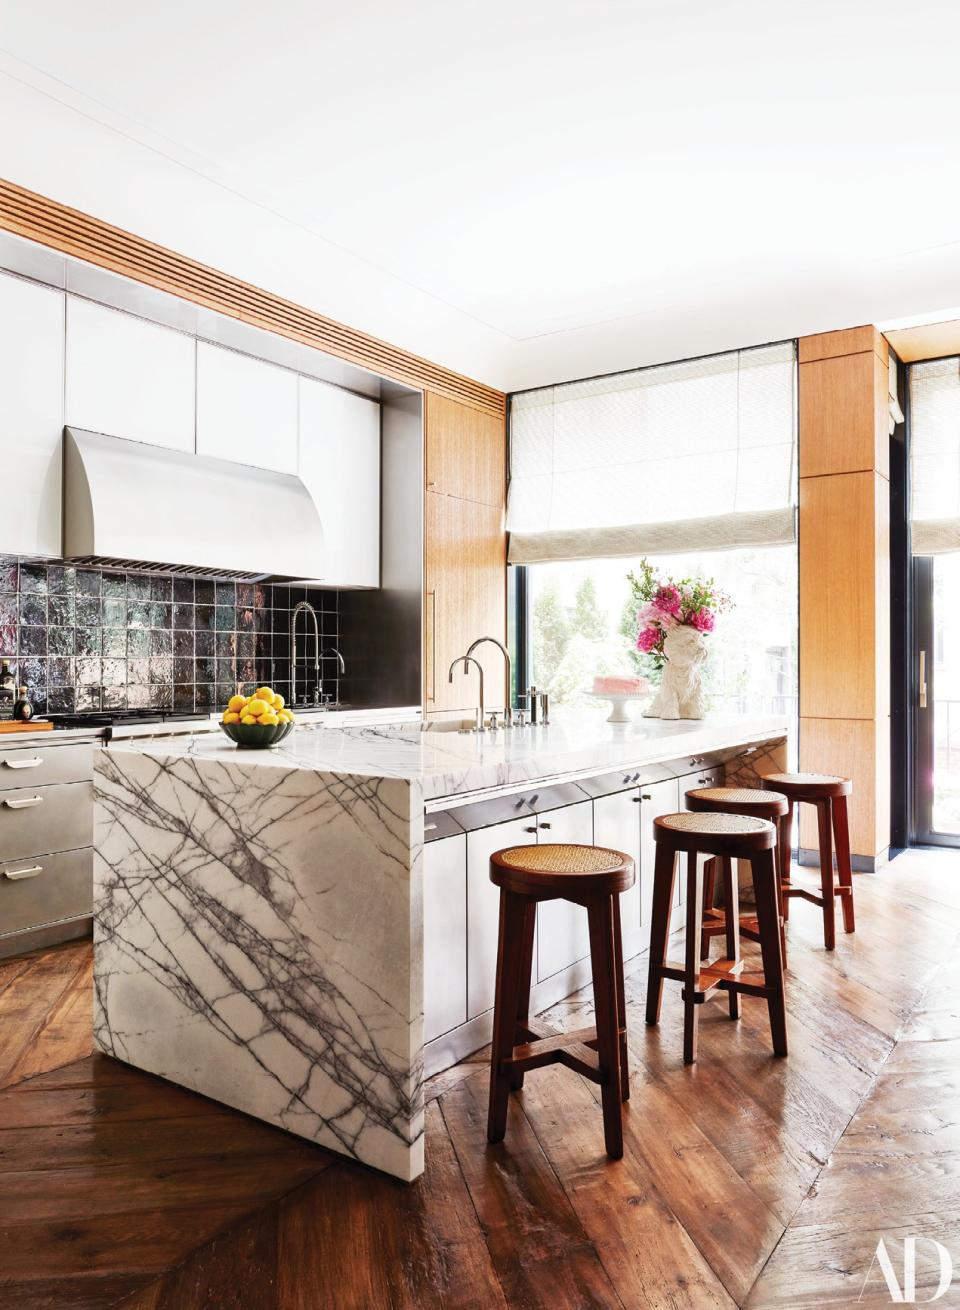 The kitchen features a custom hood and oak millwork by Ingrao. The backsplash is made of tiles by Exquisite surfaces; vintage Pierre Jeanneret stools.